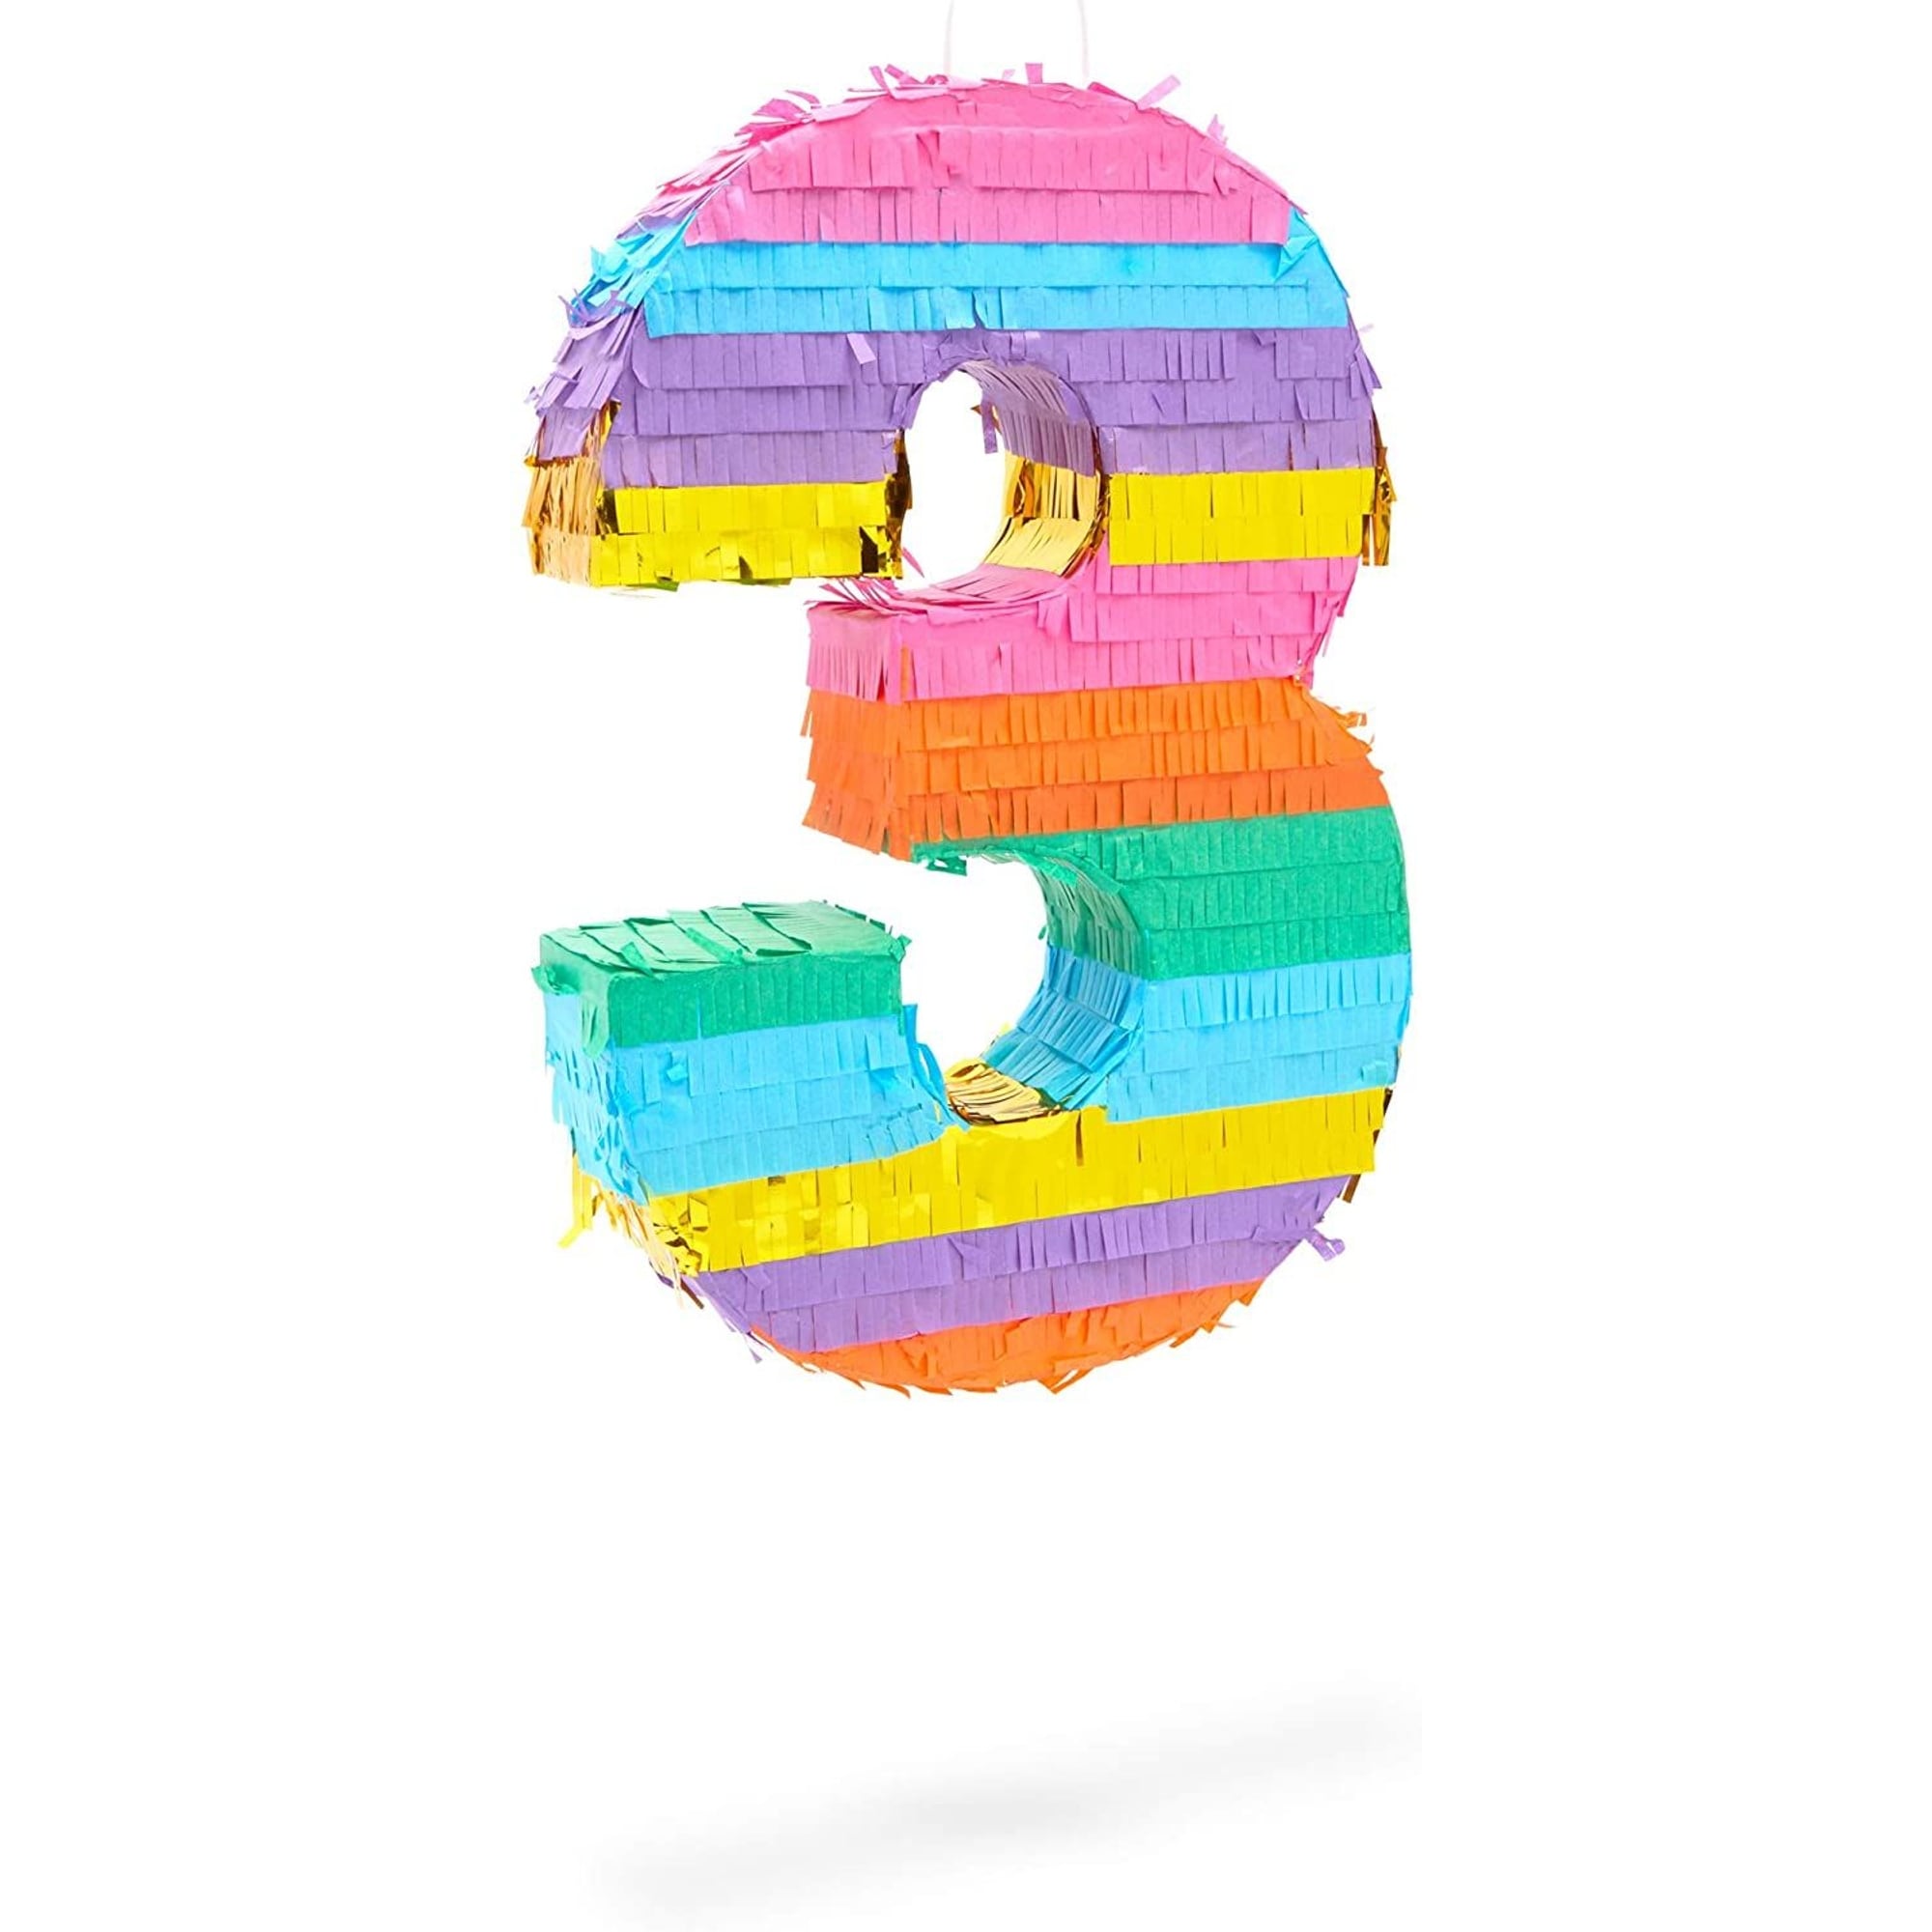 Blue Panda Rainbow Number 1 Pinata for 1st Birthday Party Supplies, Fiesta  , Cinco de Mayo Celebration (Small, 16.5 x 11 x 3 In)